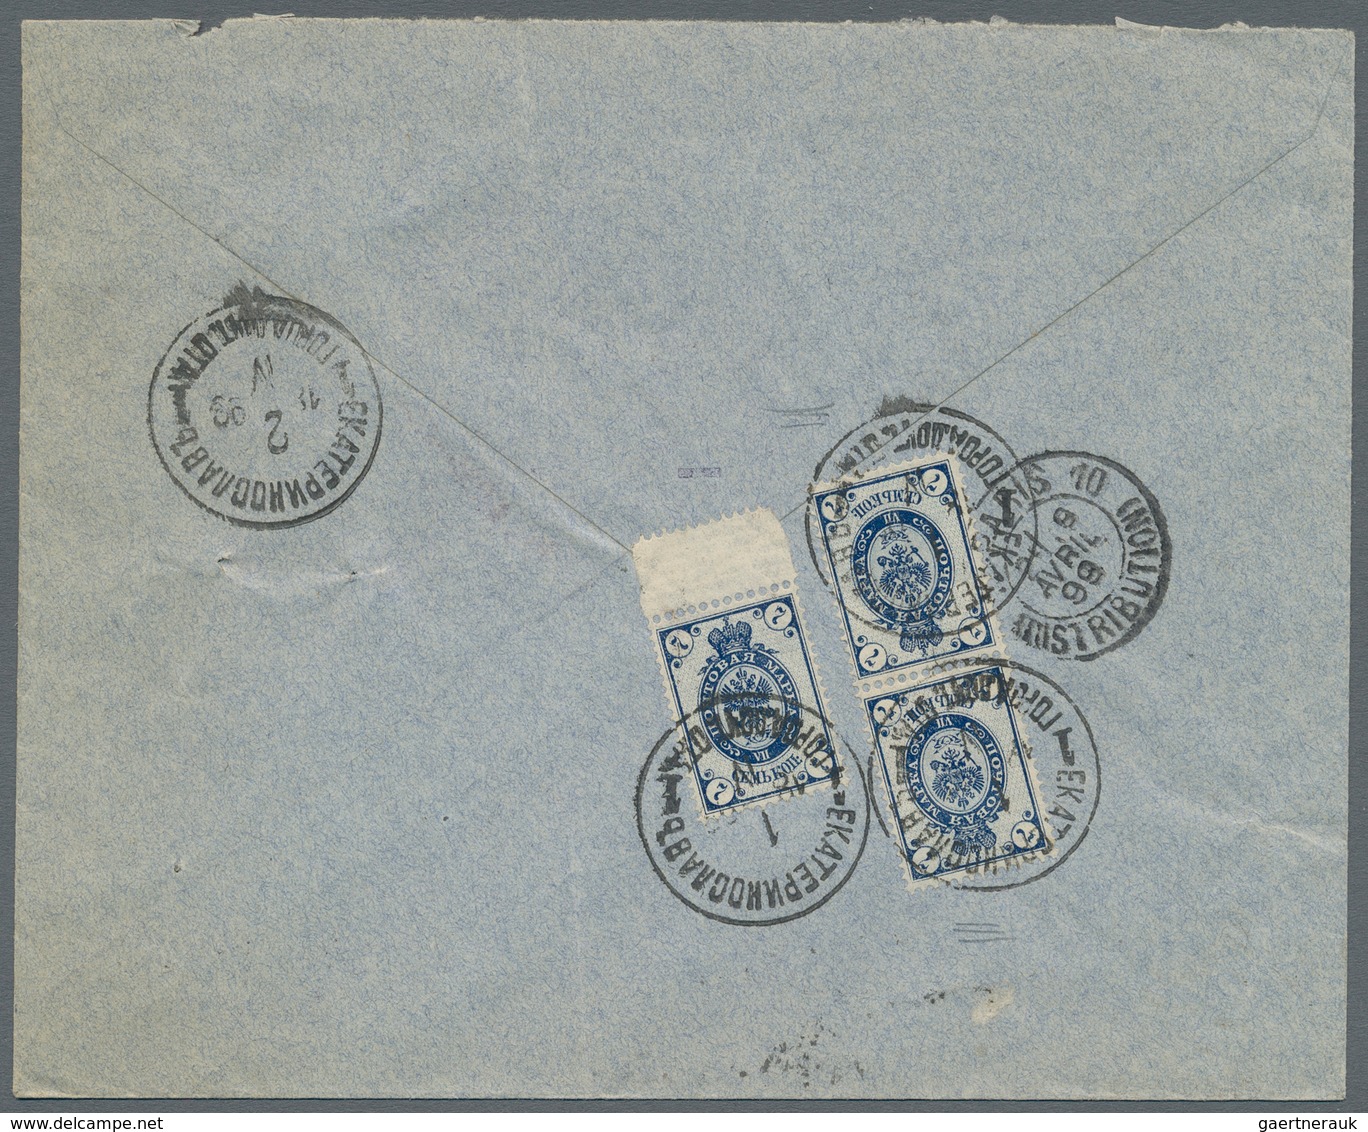 Russland: 1896/1914 four items are sent from PO's of different factories, one cover sent by register